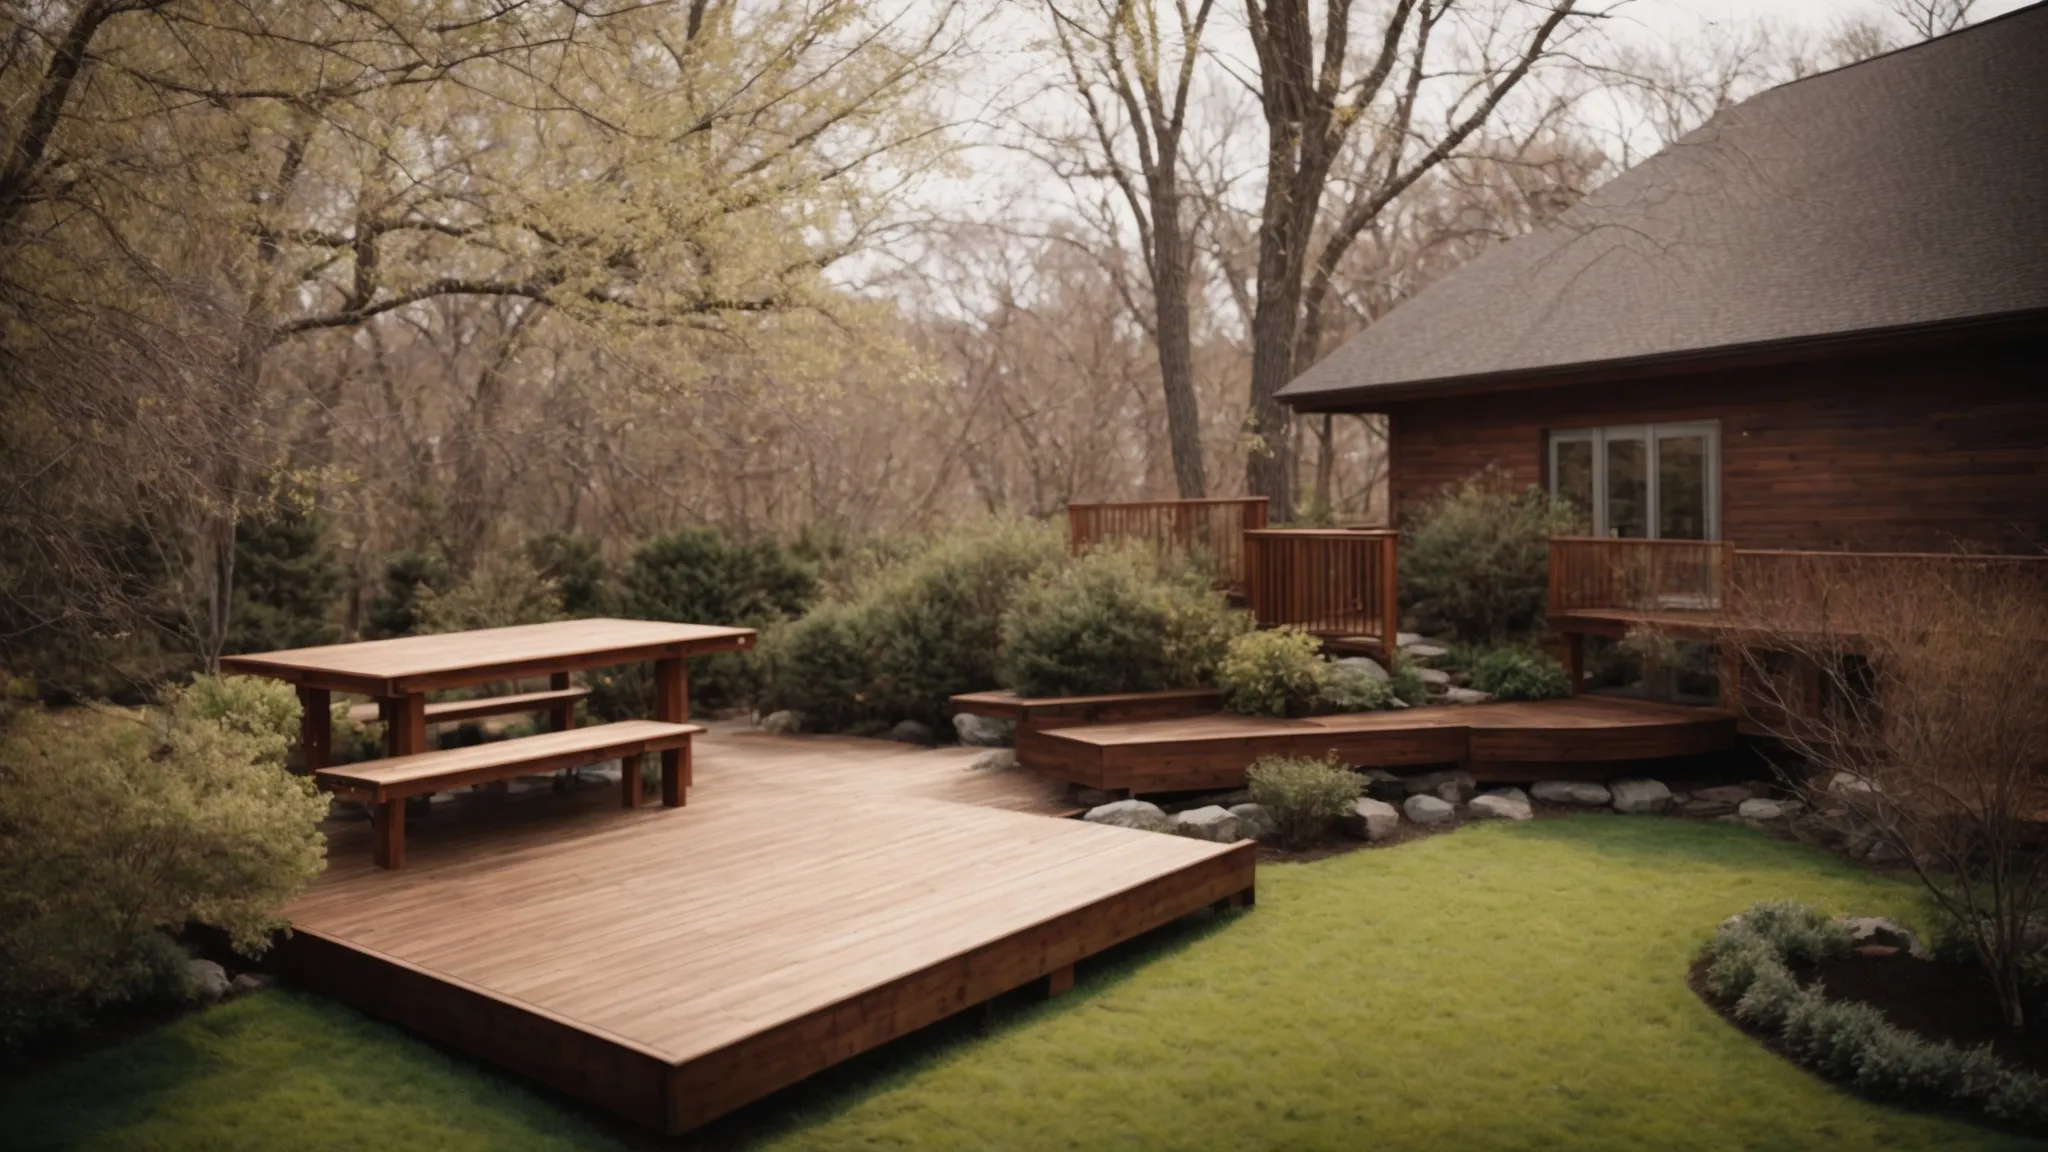 a serene backyard transitioning into spring with a half-built wooden deck, surrounded by budding trees.